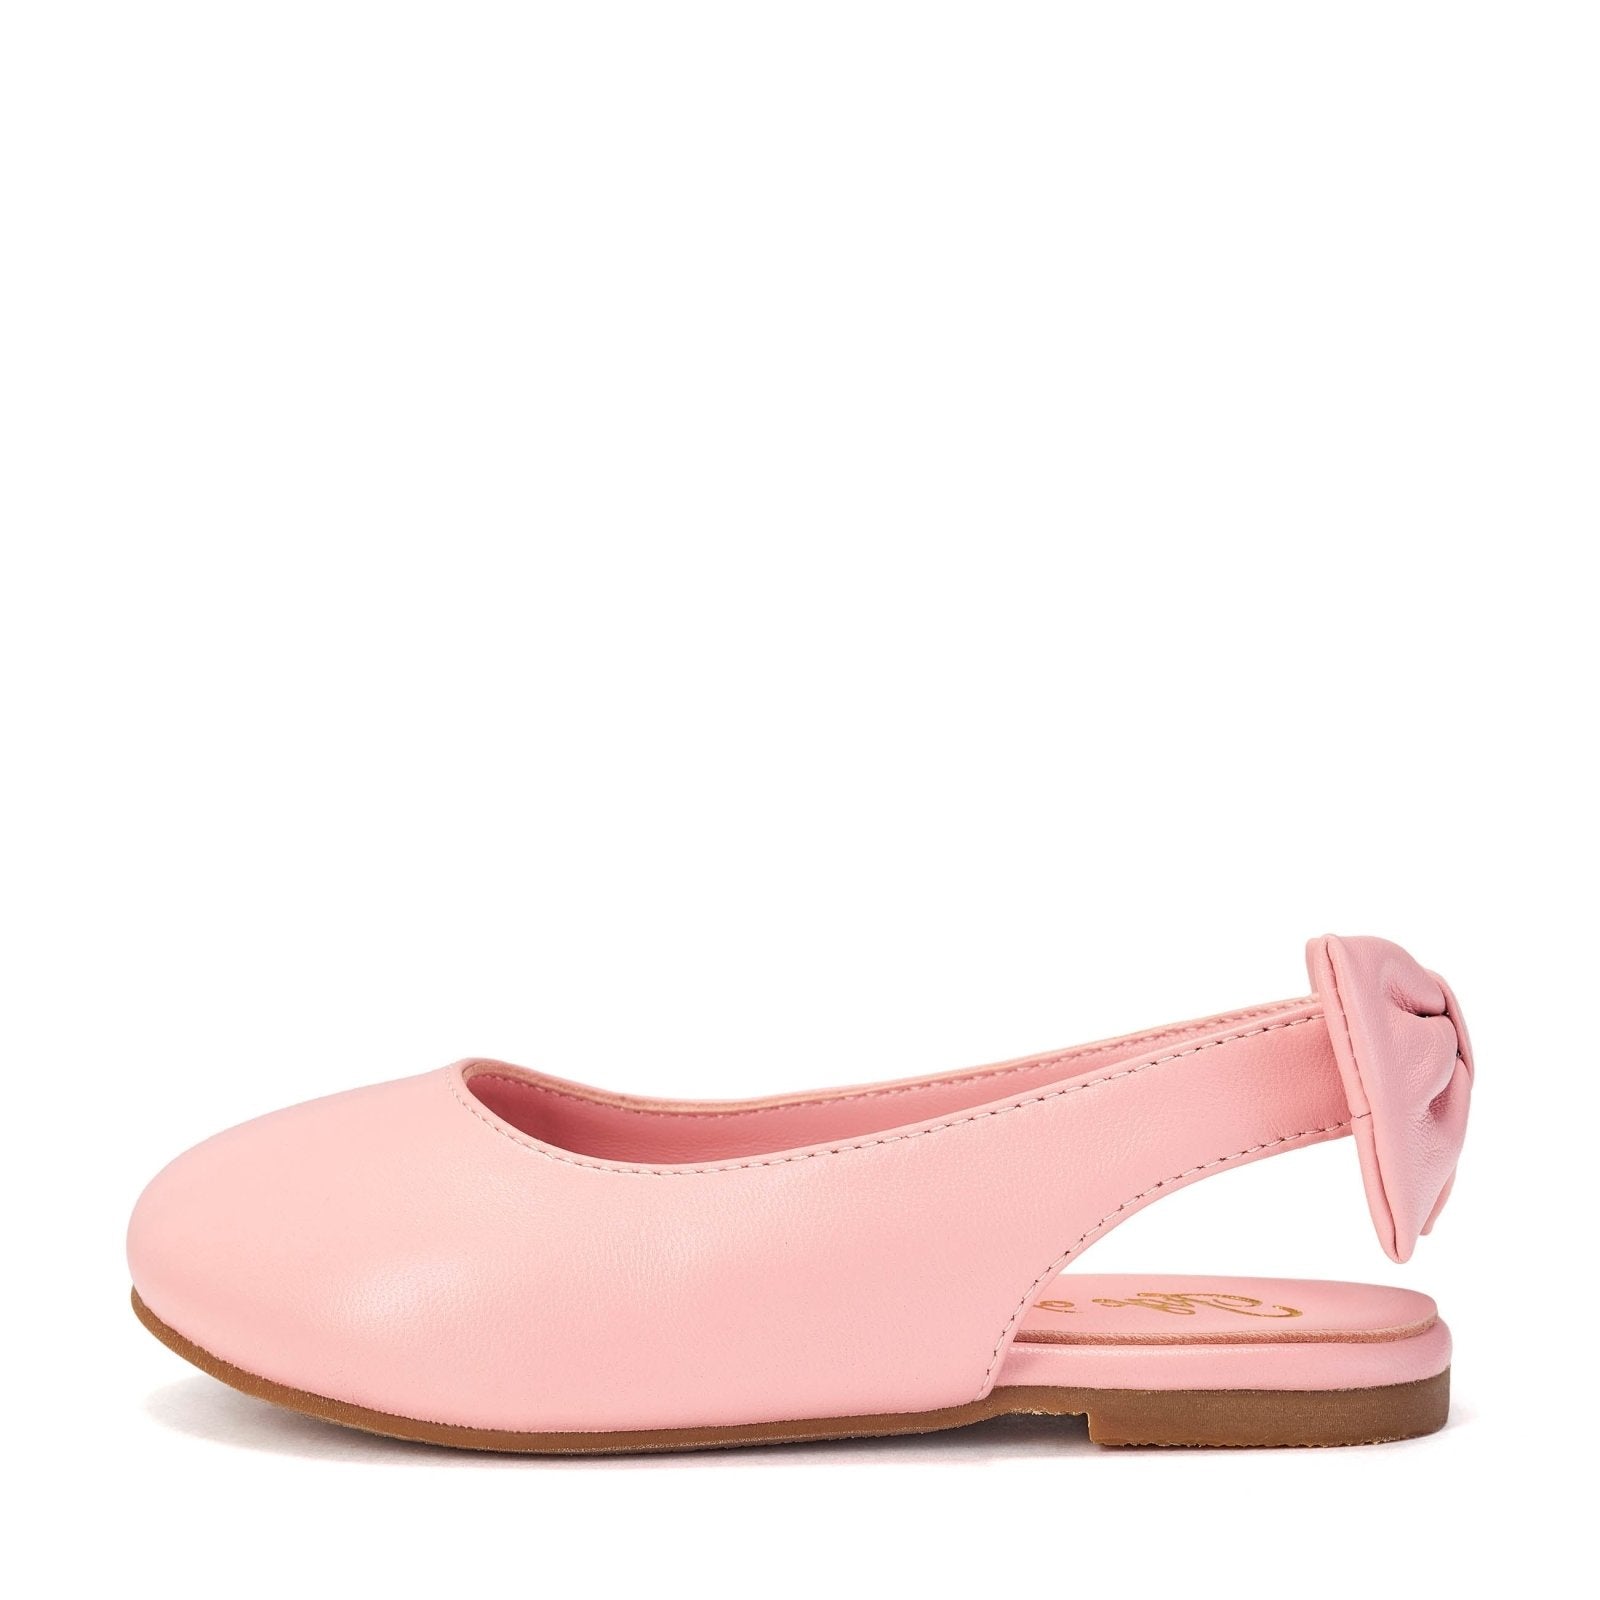 Amelie Leather Pink Sandals by Age of Innocence